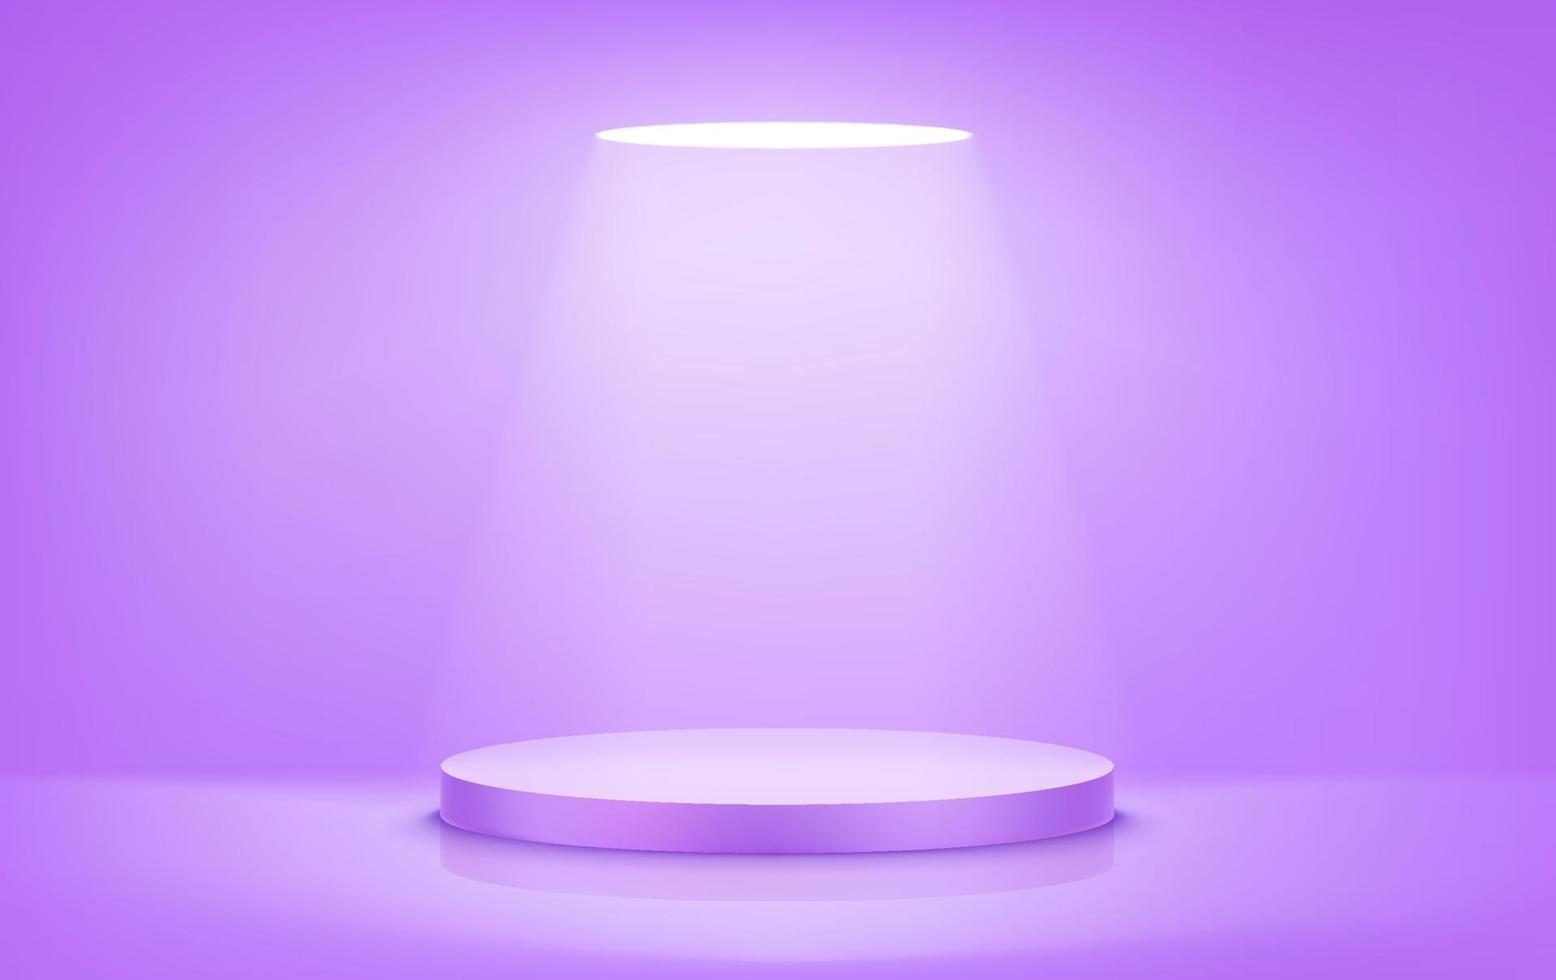 Illuminated violet round stage with bright light. Realistic vector illustration